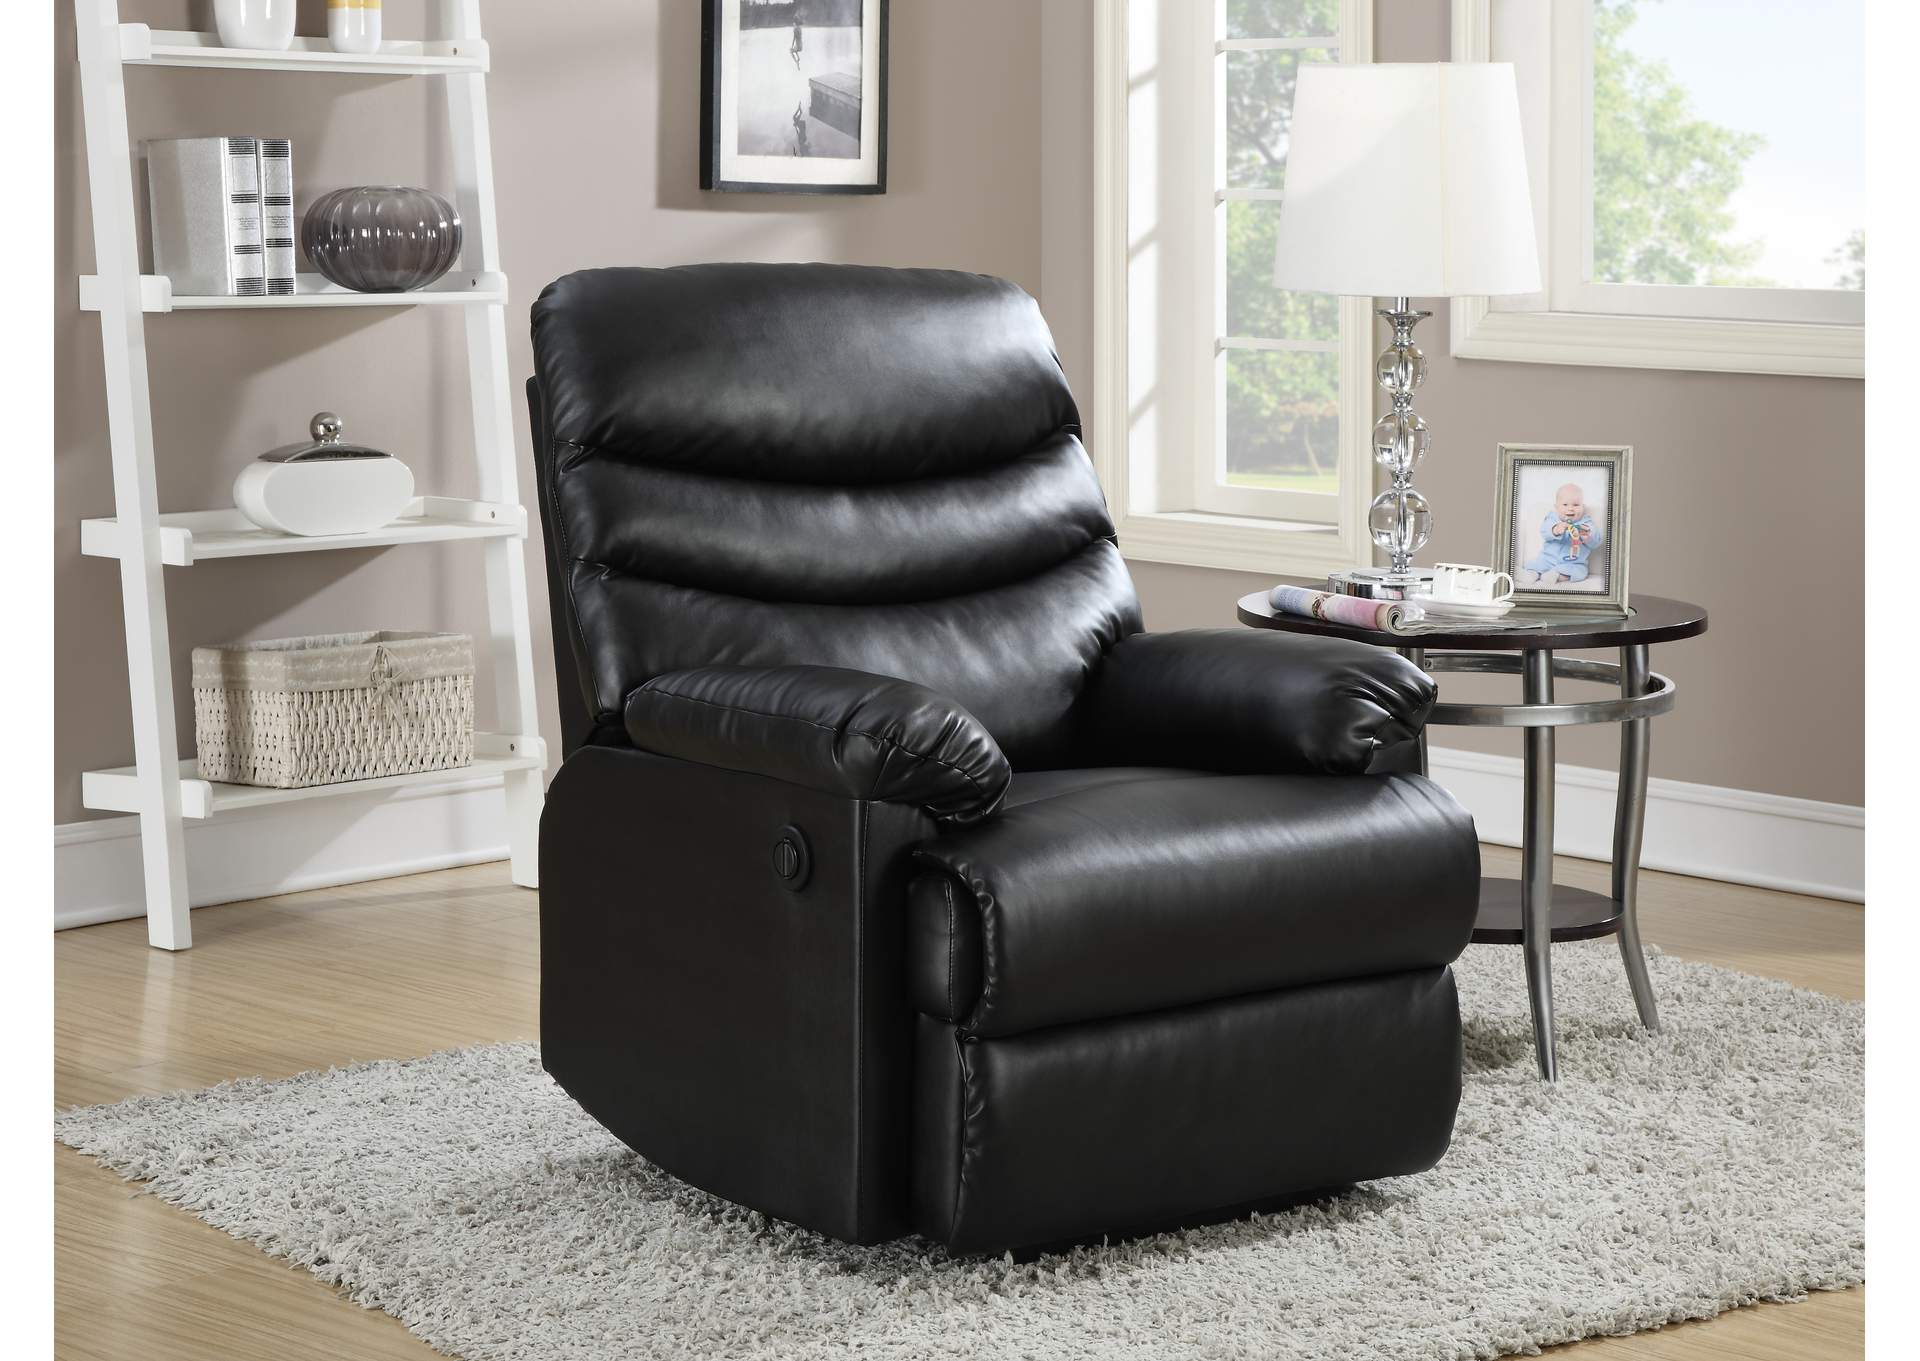 Palmdale 91491 Power Recliner Pu 05 Black A,Elements